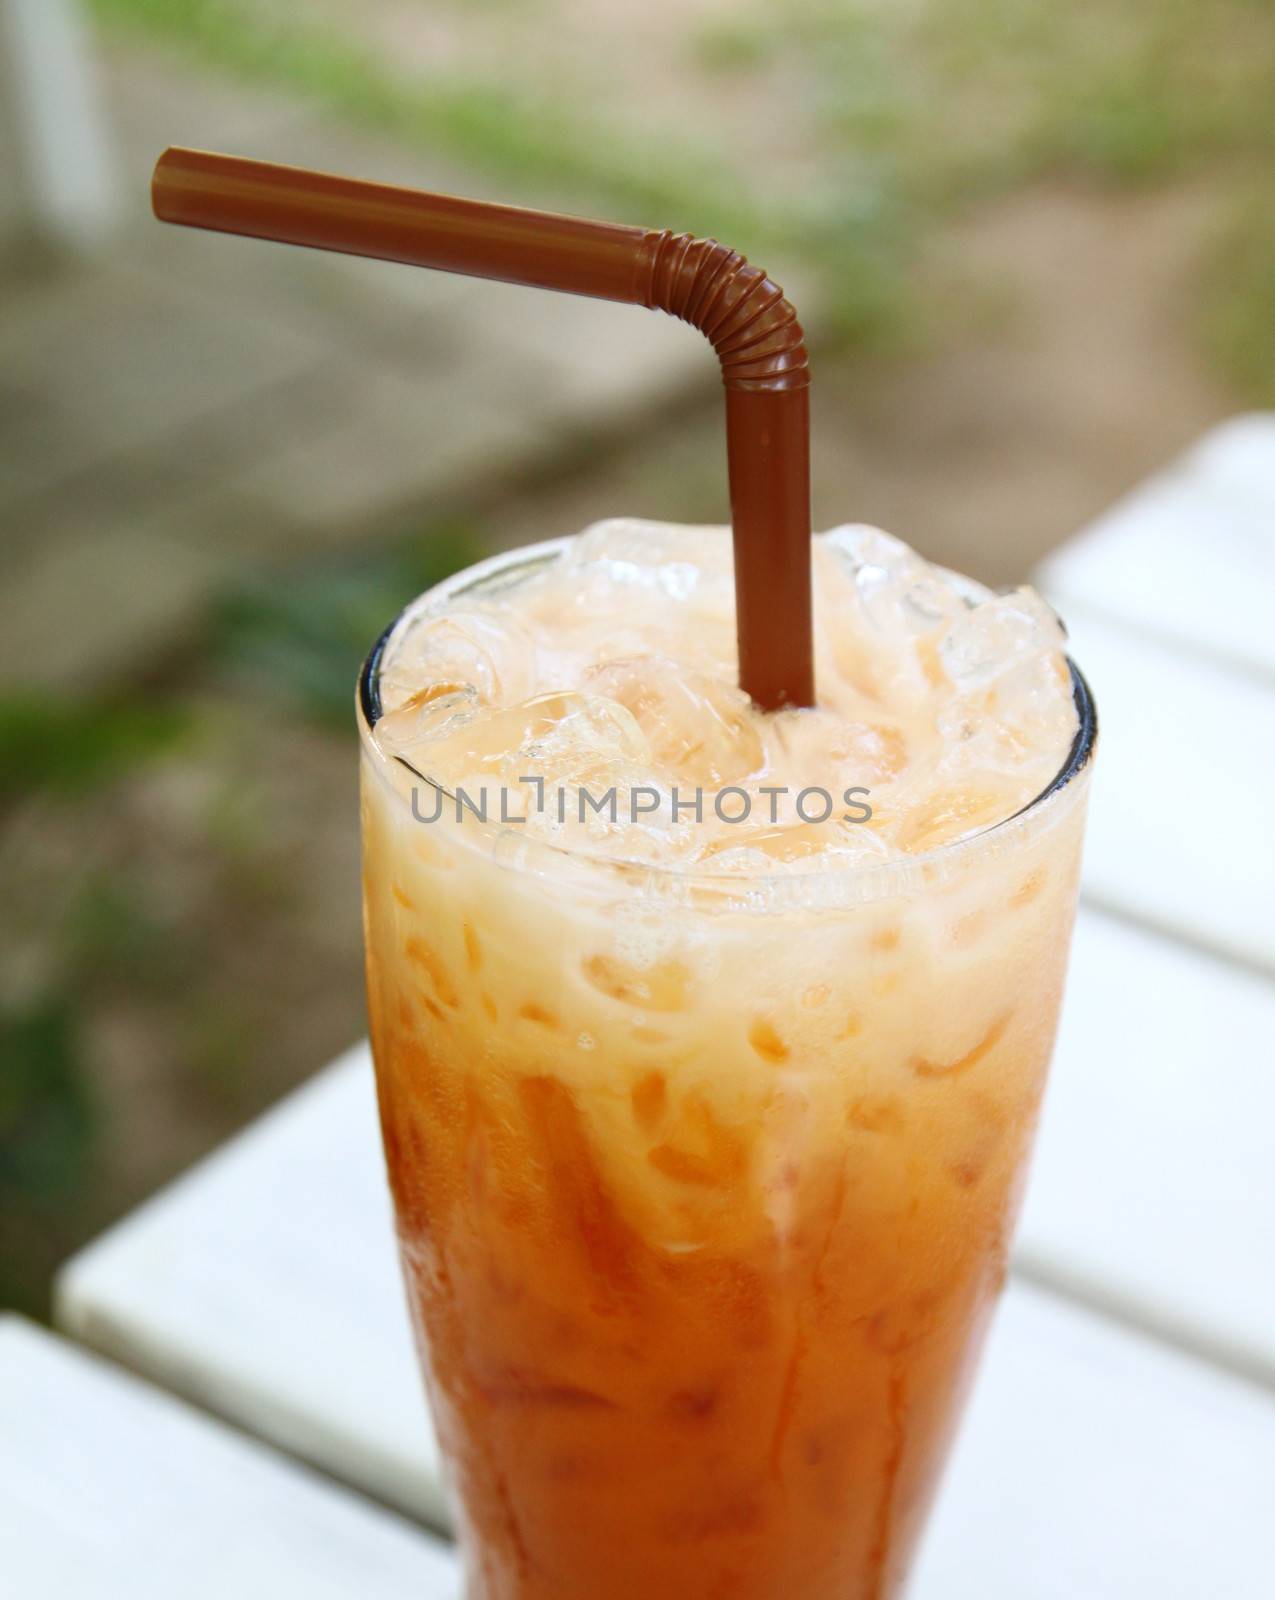 Iced tea with straw by nuchylee